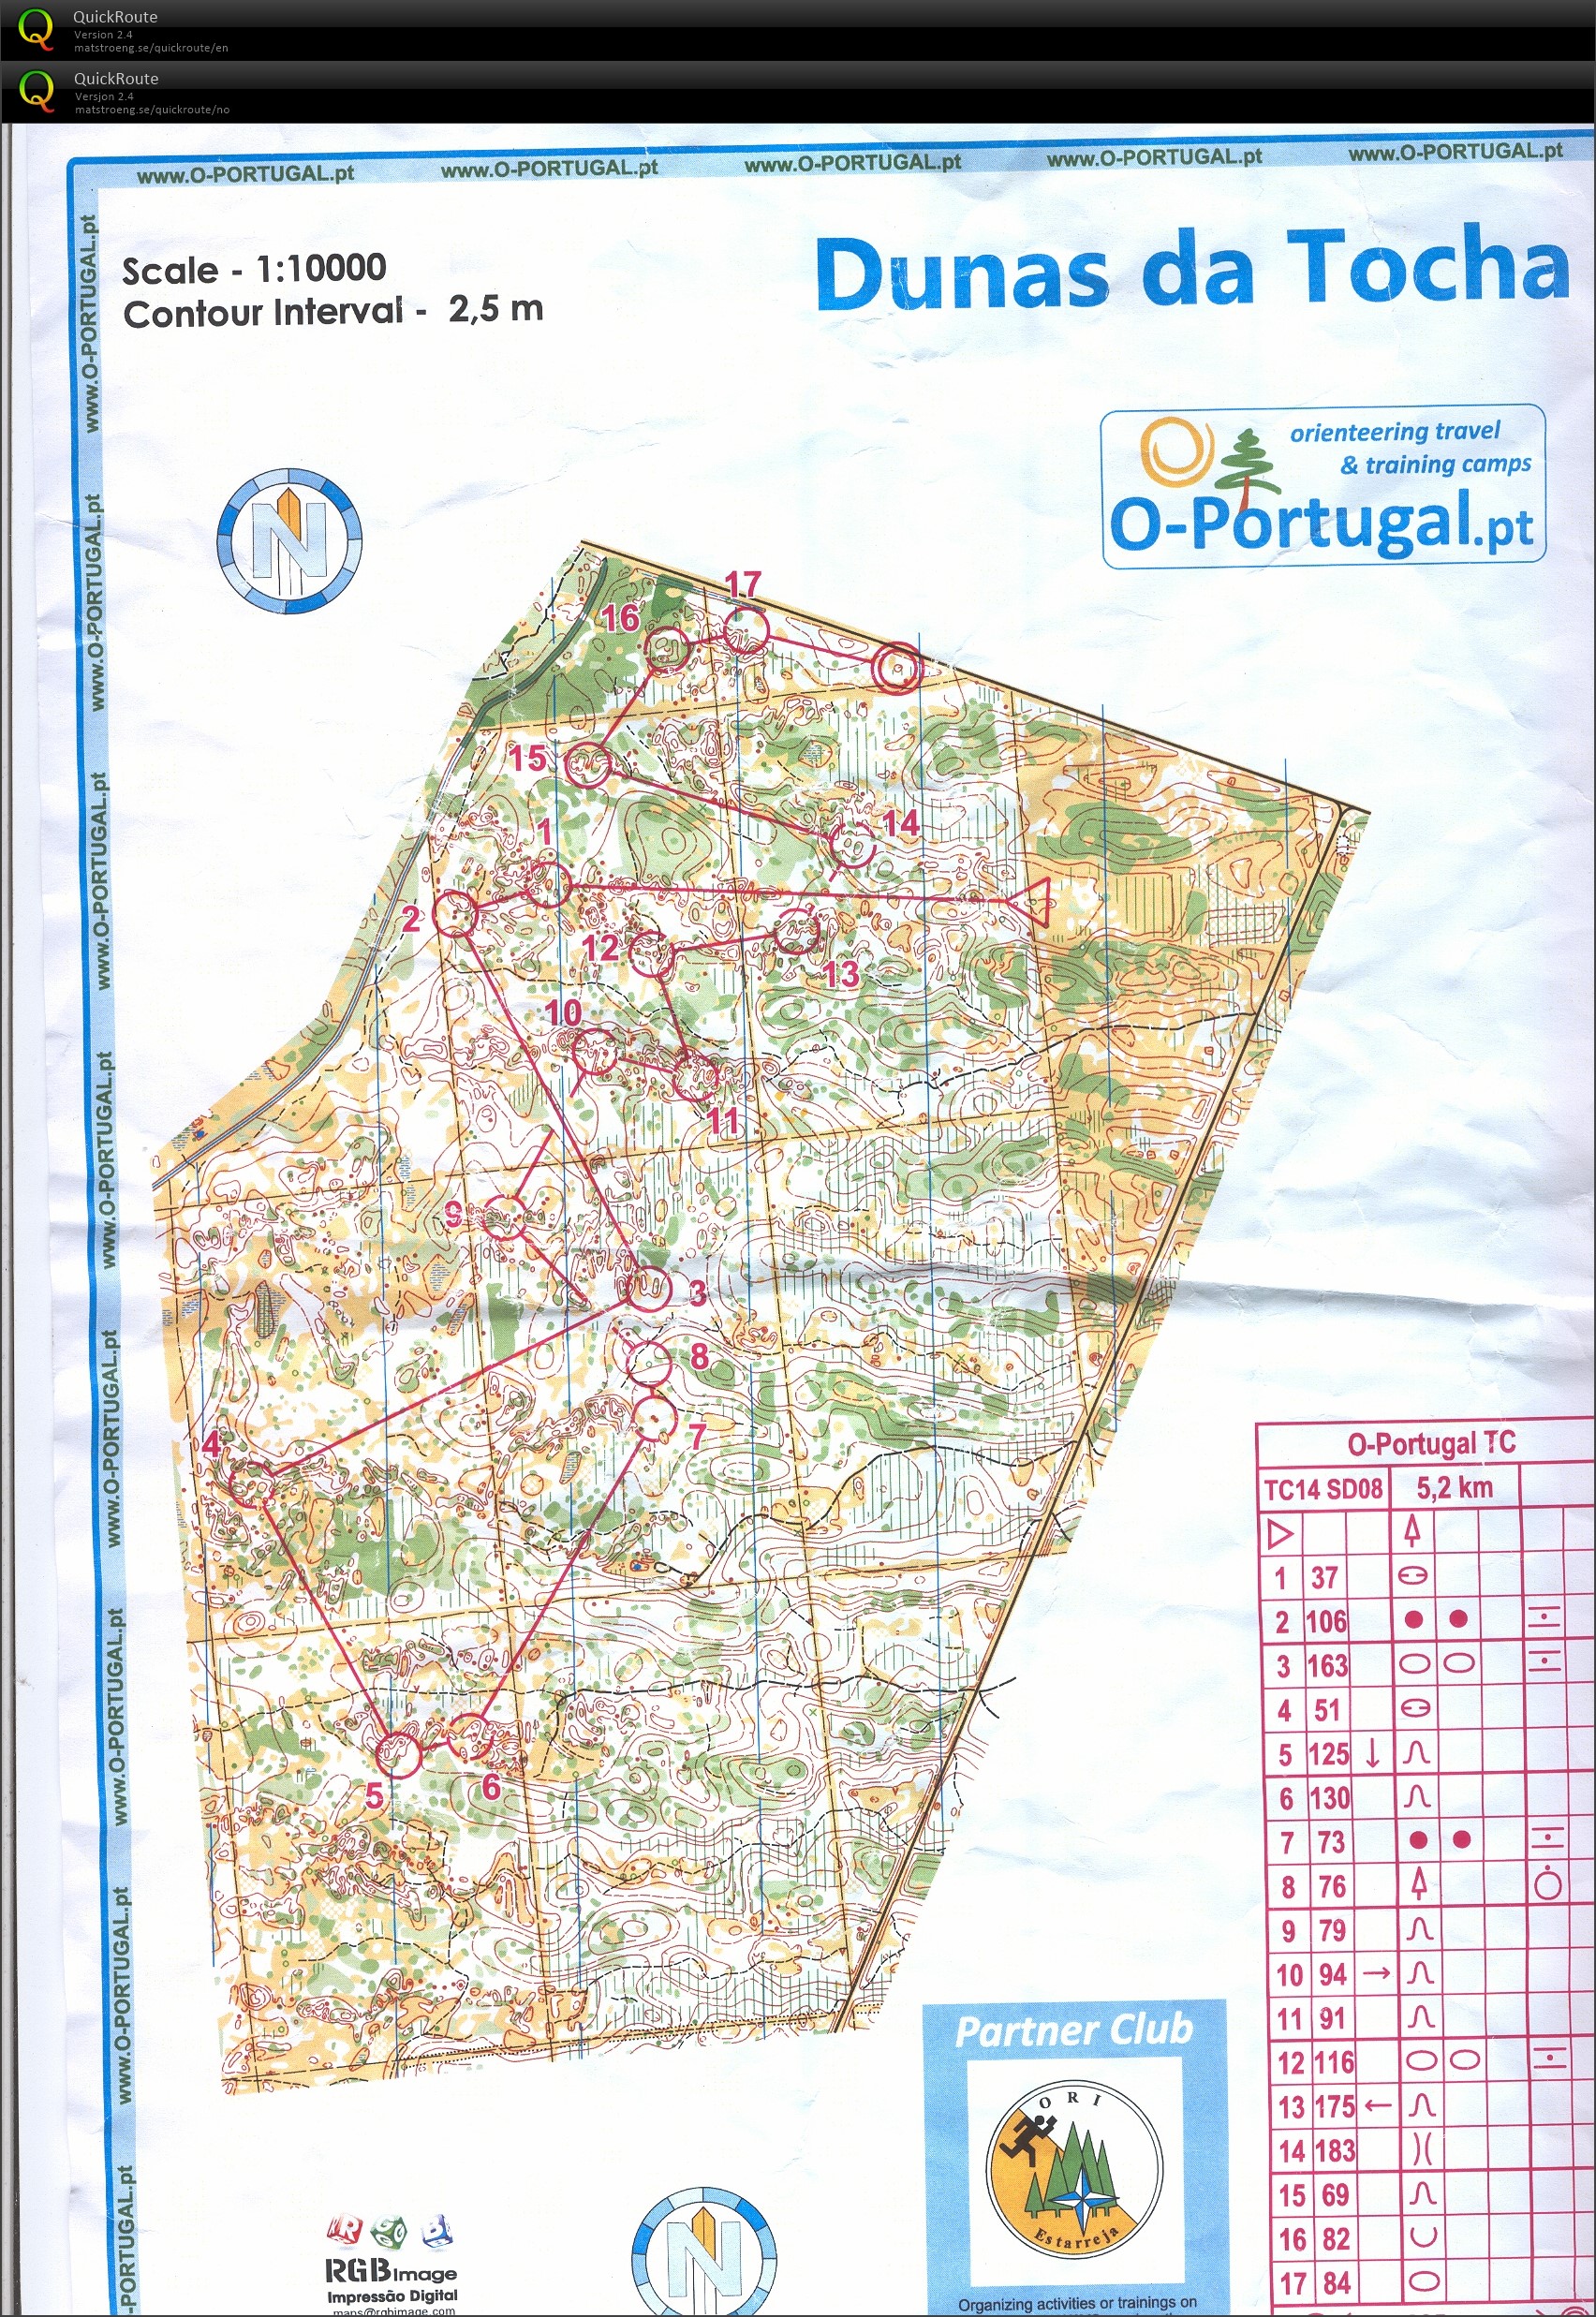 Portugal pass 7 (19/02/2014)